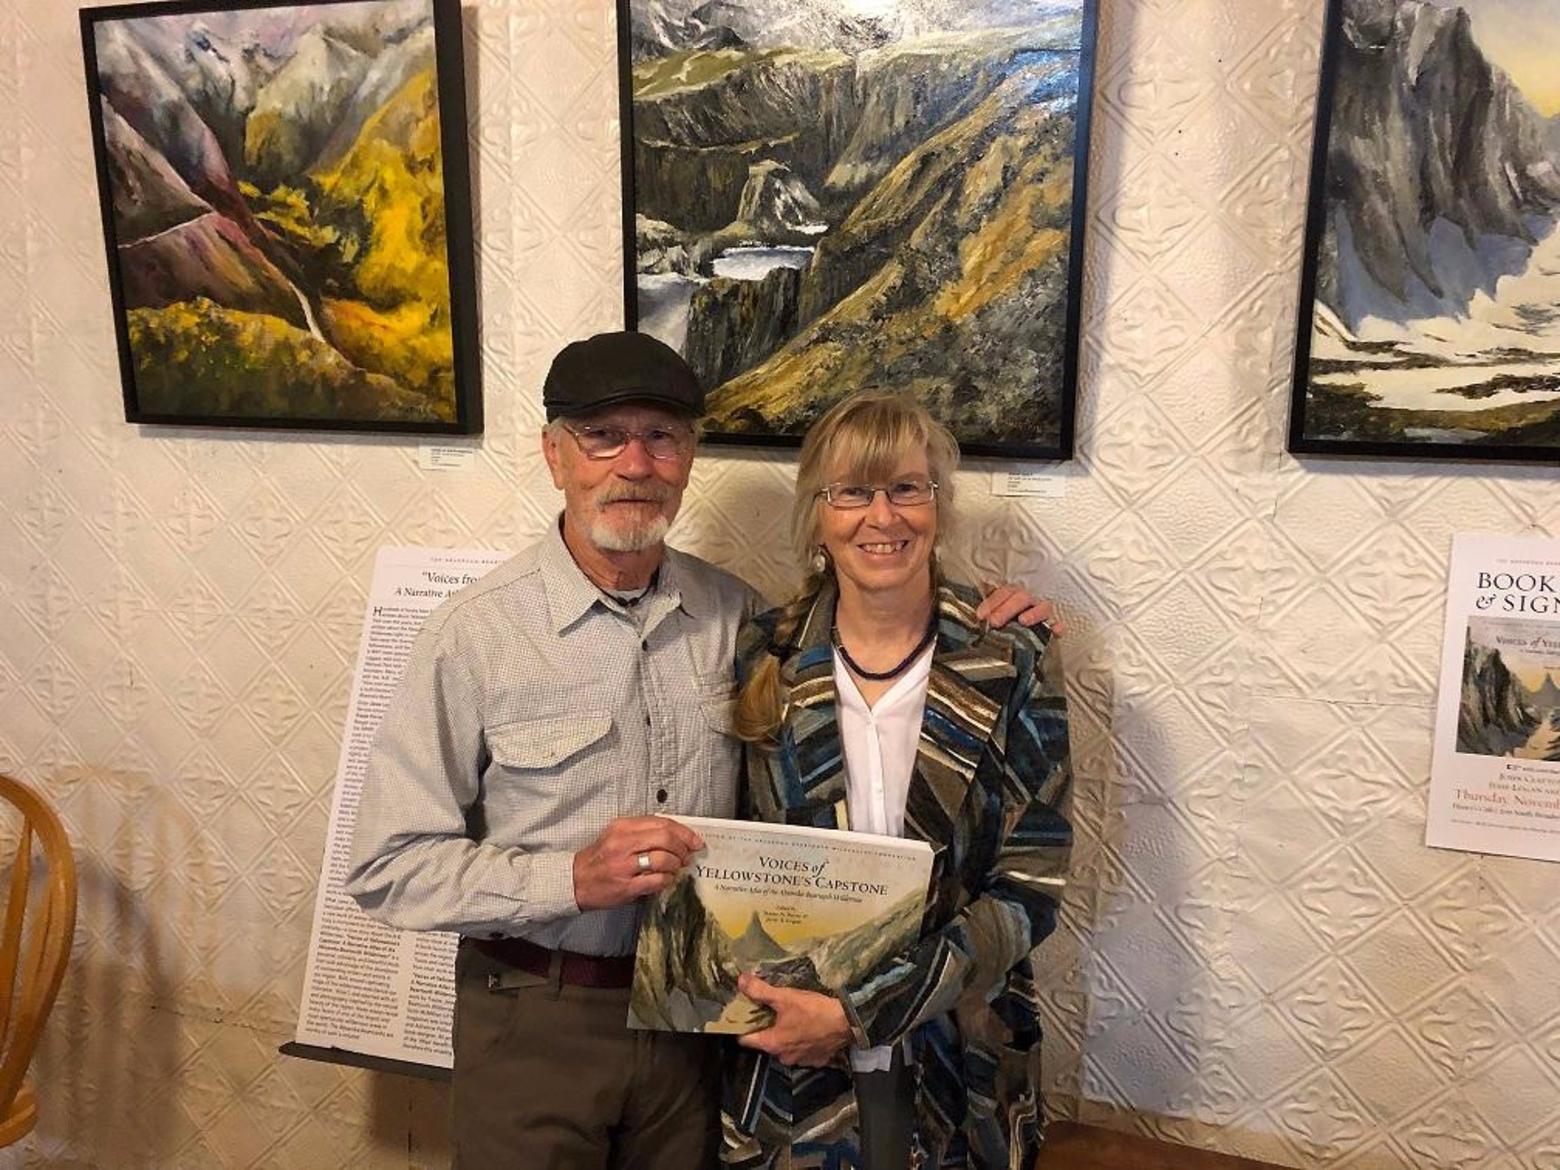 Before a standing-only crowd, Jesse Logan and Traute Parrie hold their labor and love and momentous literary contribution celebrating one of America's most heralded wildlands.  Photo courtesy Don Carroll